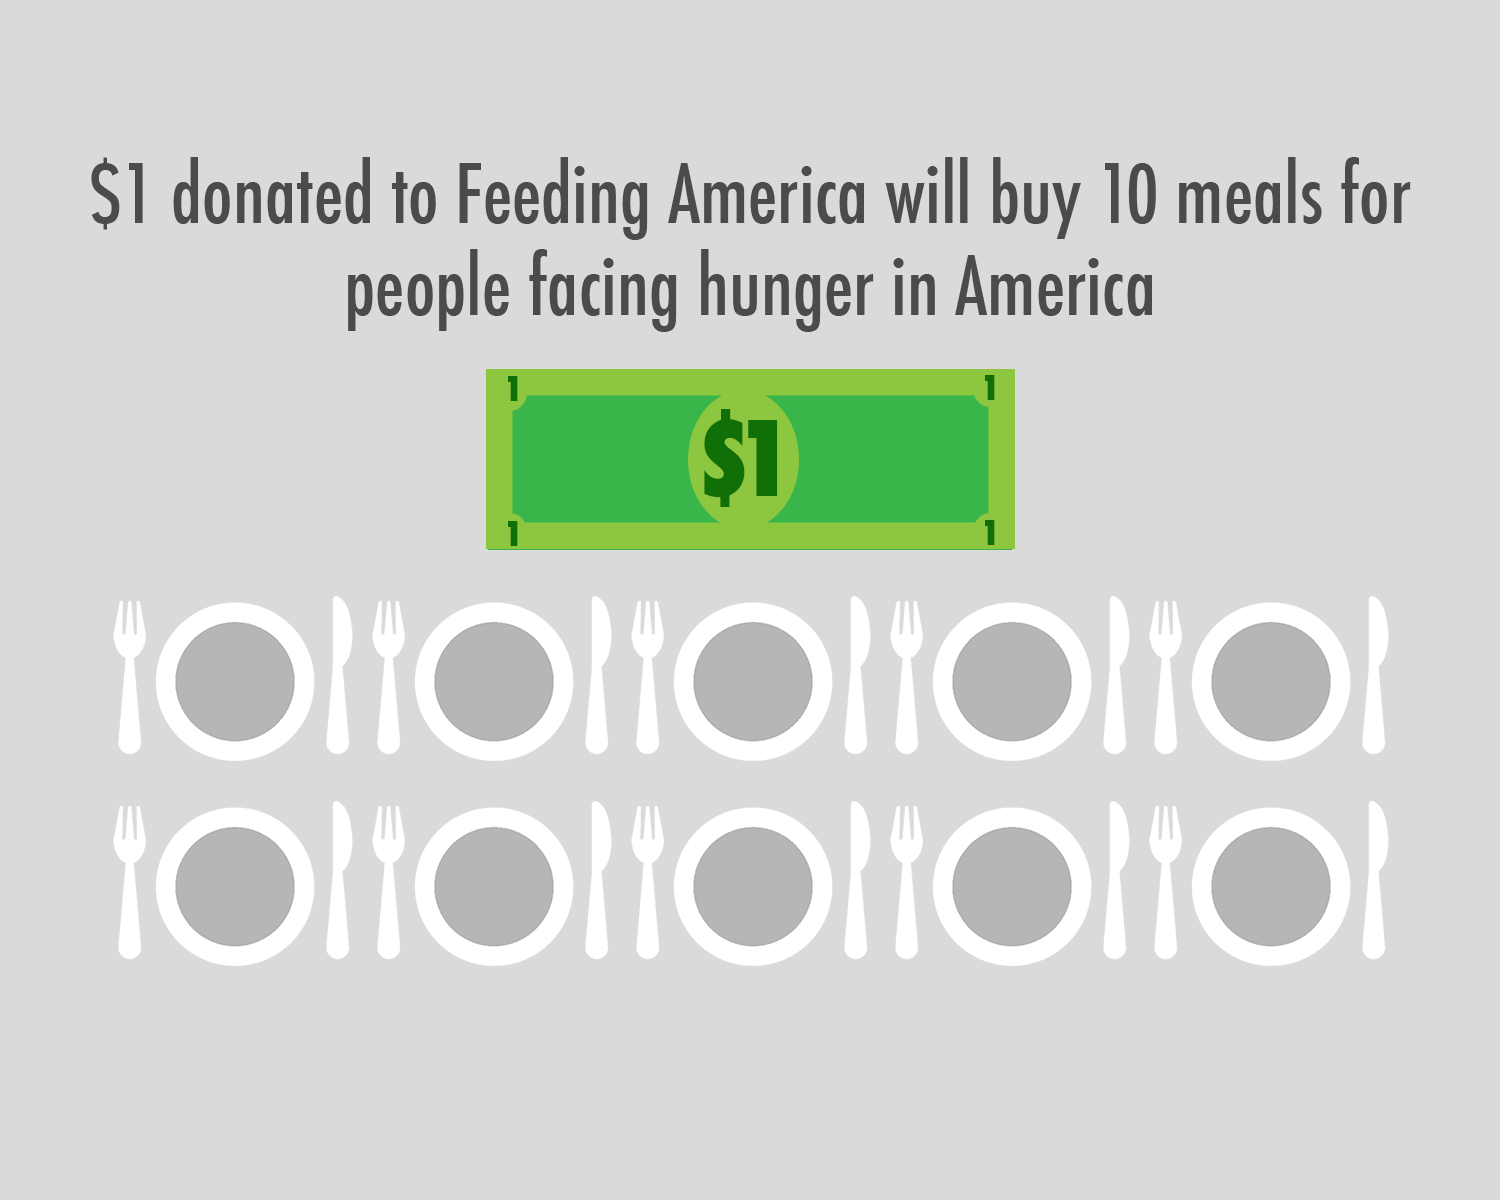 One dollar to Feeding America pays for 10 meals